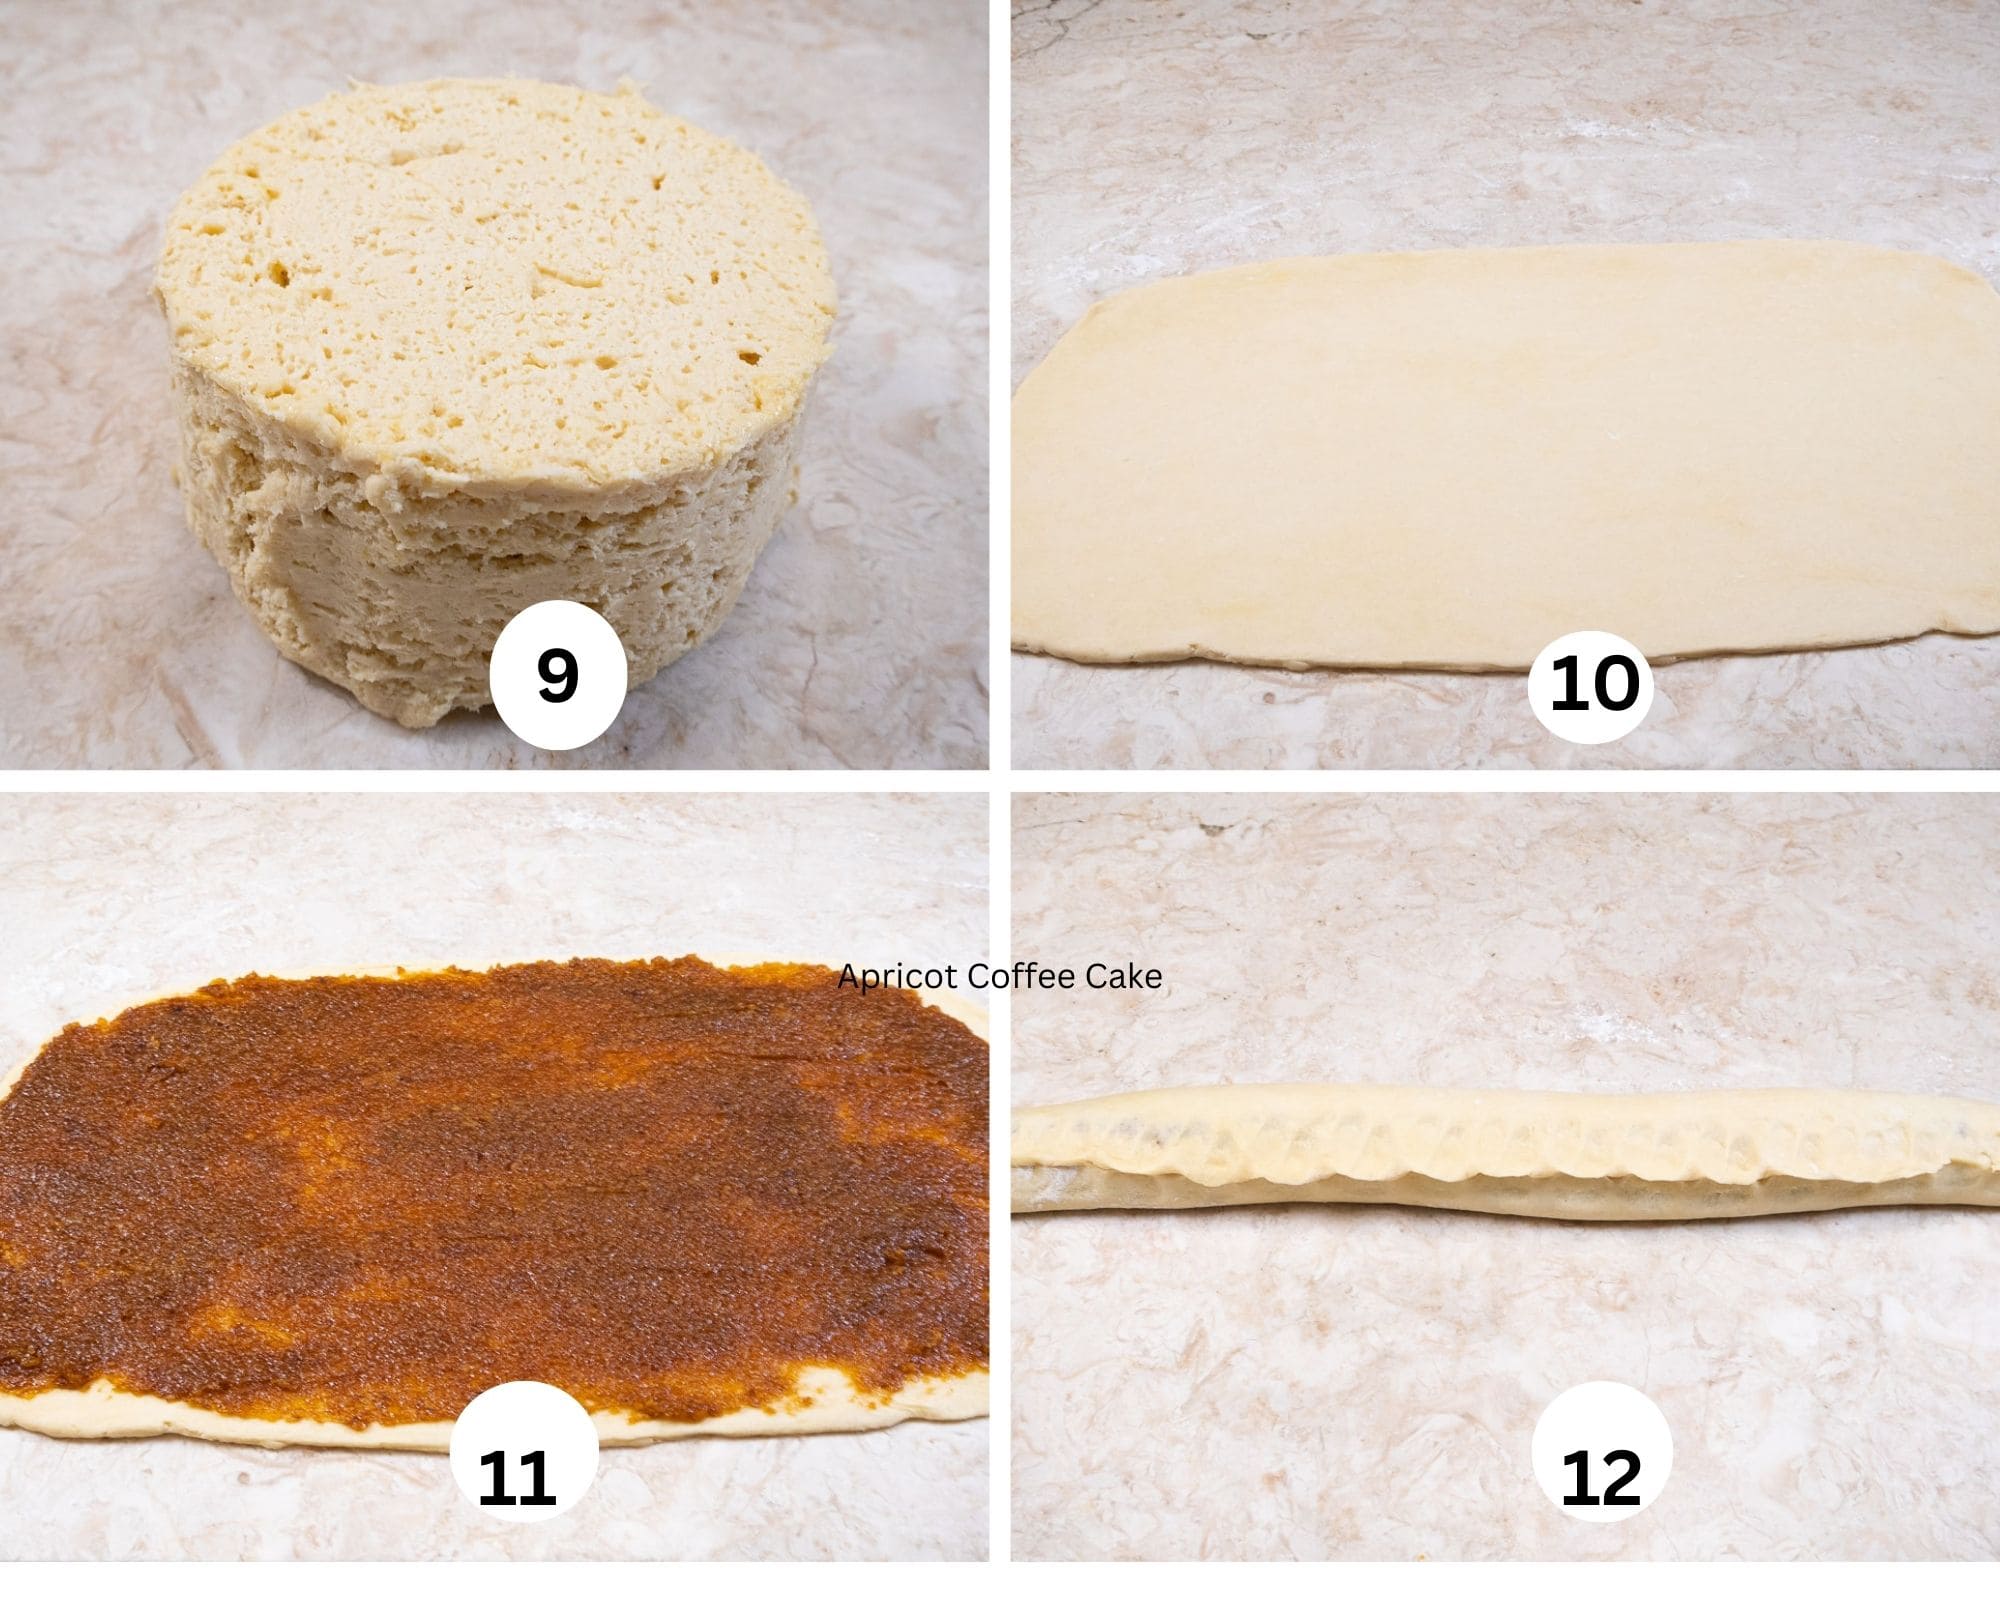 The third collage shows the assembly of the parts.  The brioche out of the refrigerator, rolled out, spread with the apricot filling, rolled up and the seam pinched together.  